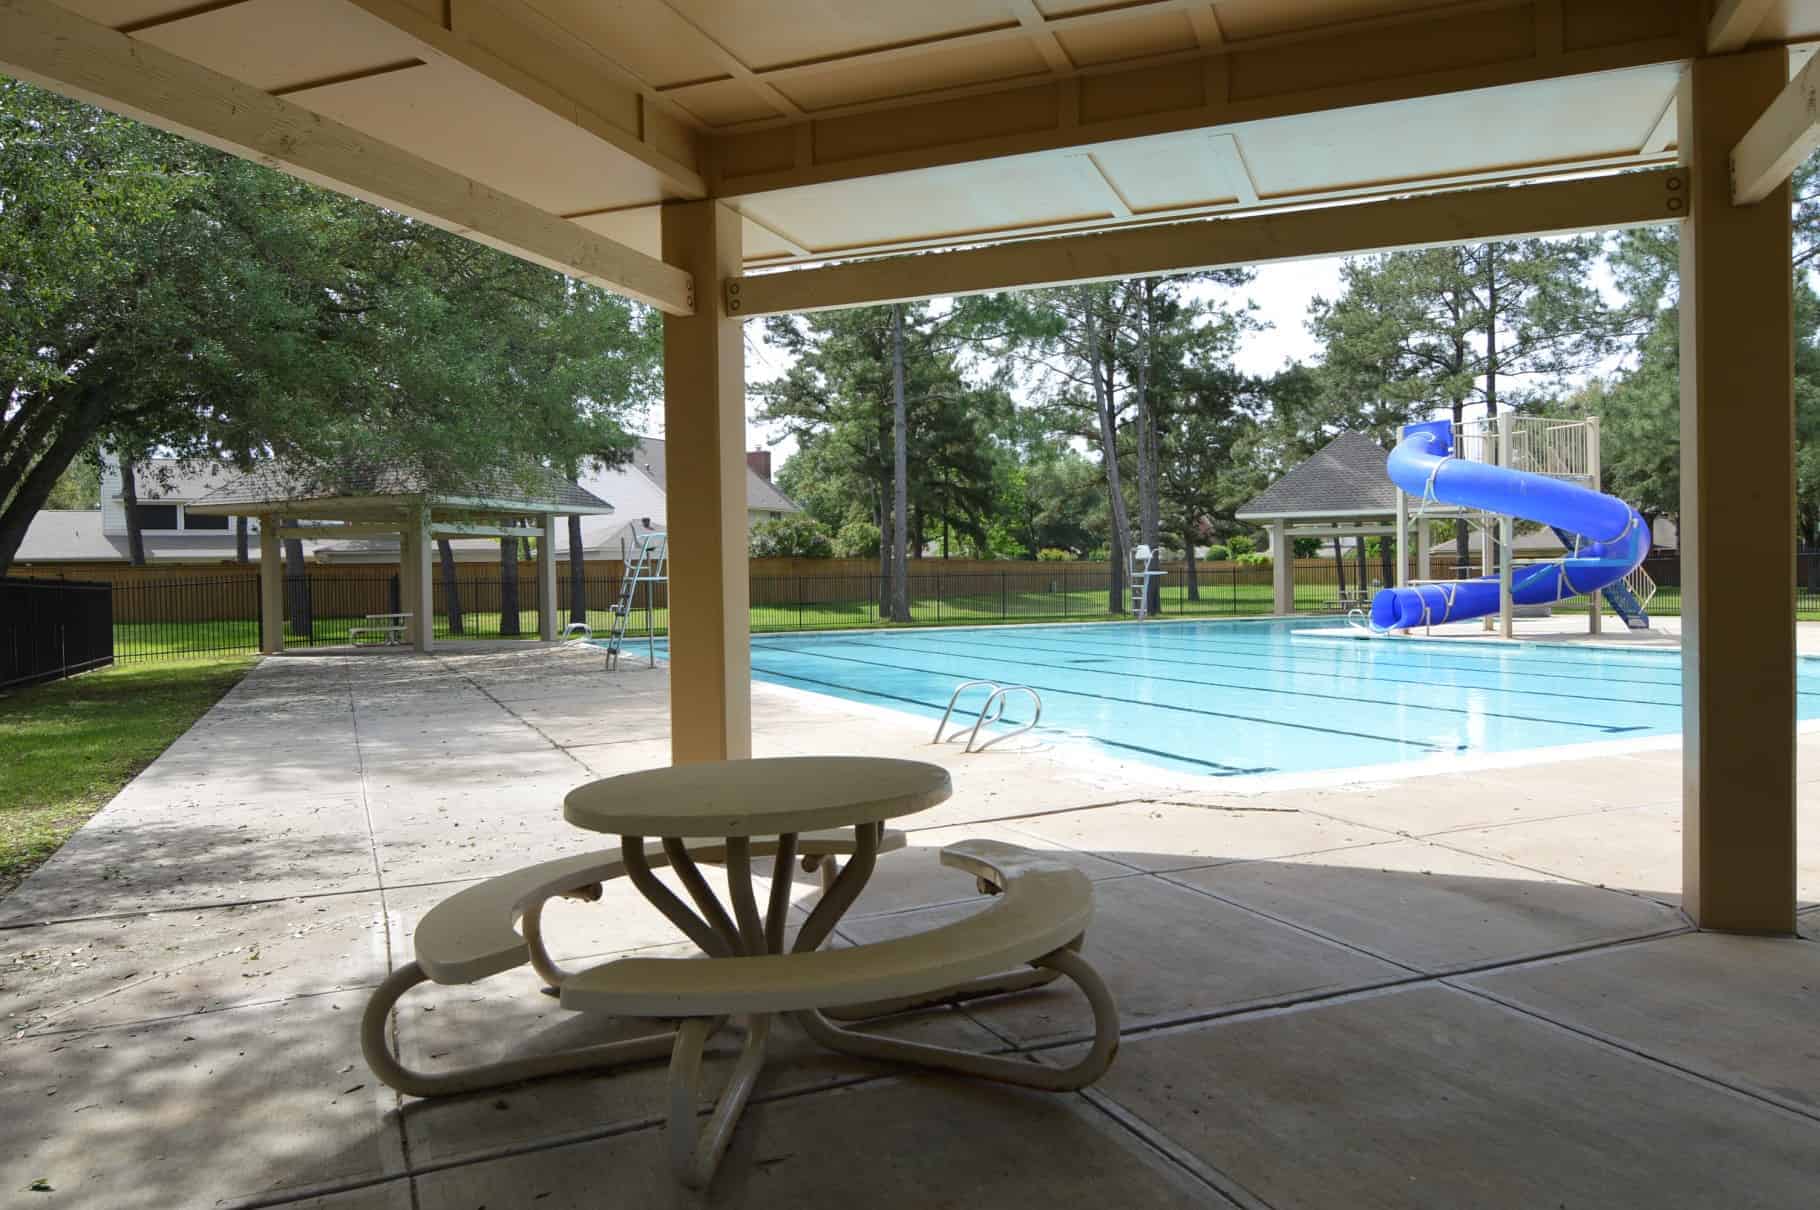 Copperfield Houston TX Southcreek Village Covered Pool Area Royal Gardens and Autumn Laurel